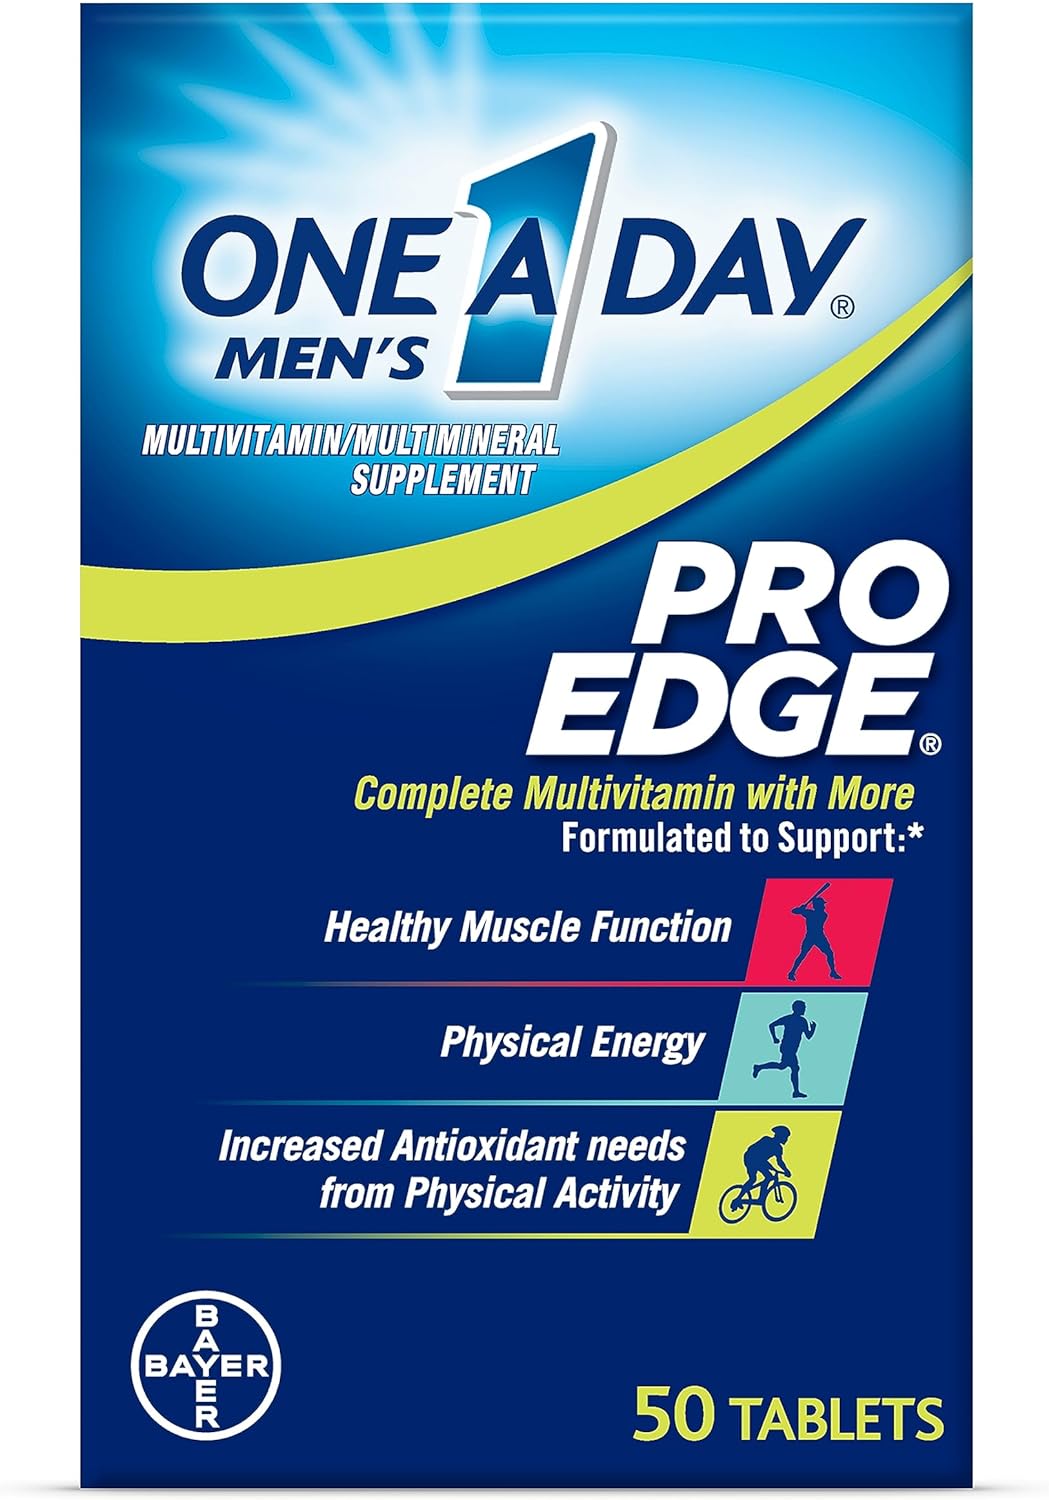 One A Day Men’s Pro Edge Multivitamin, Supplement wit